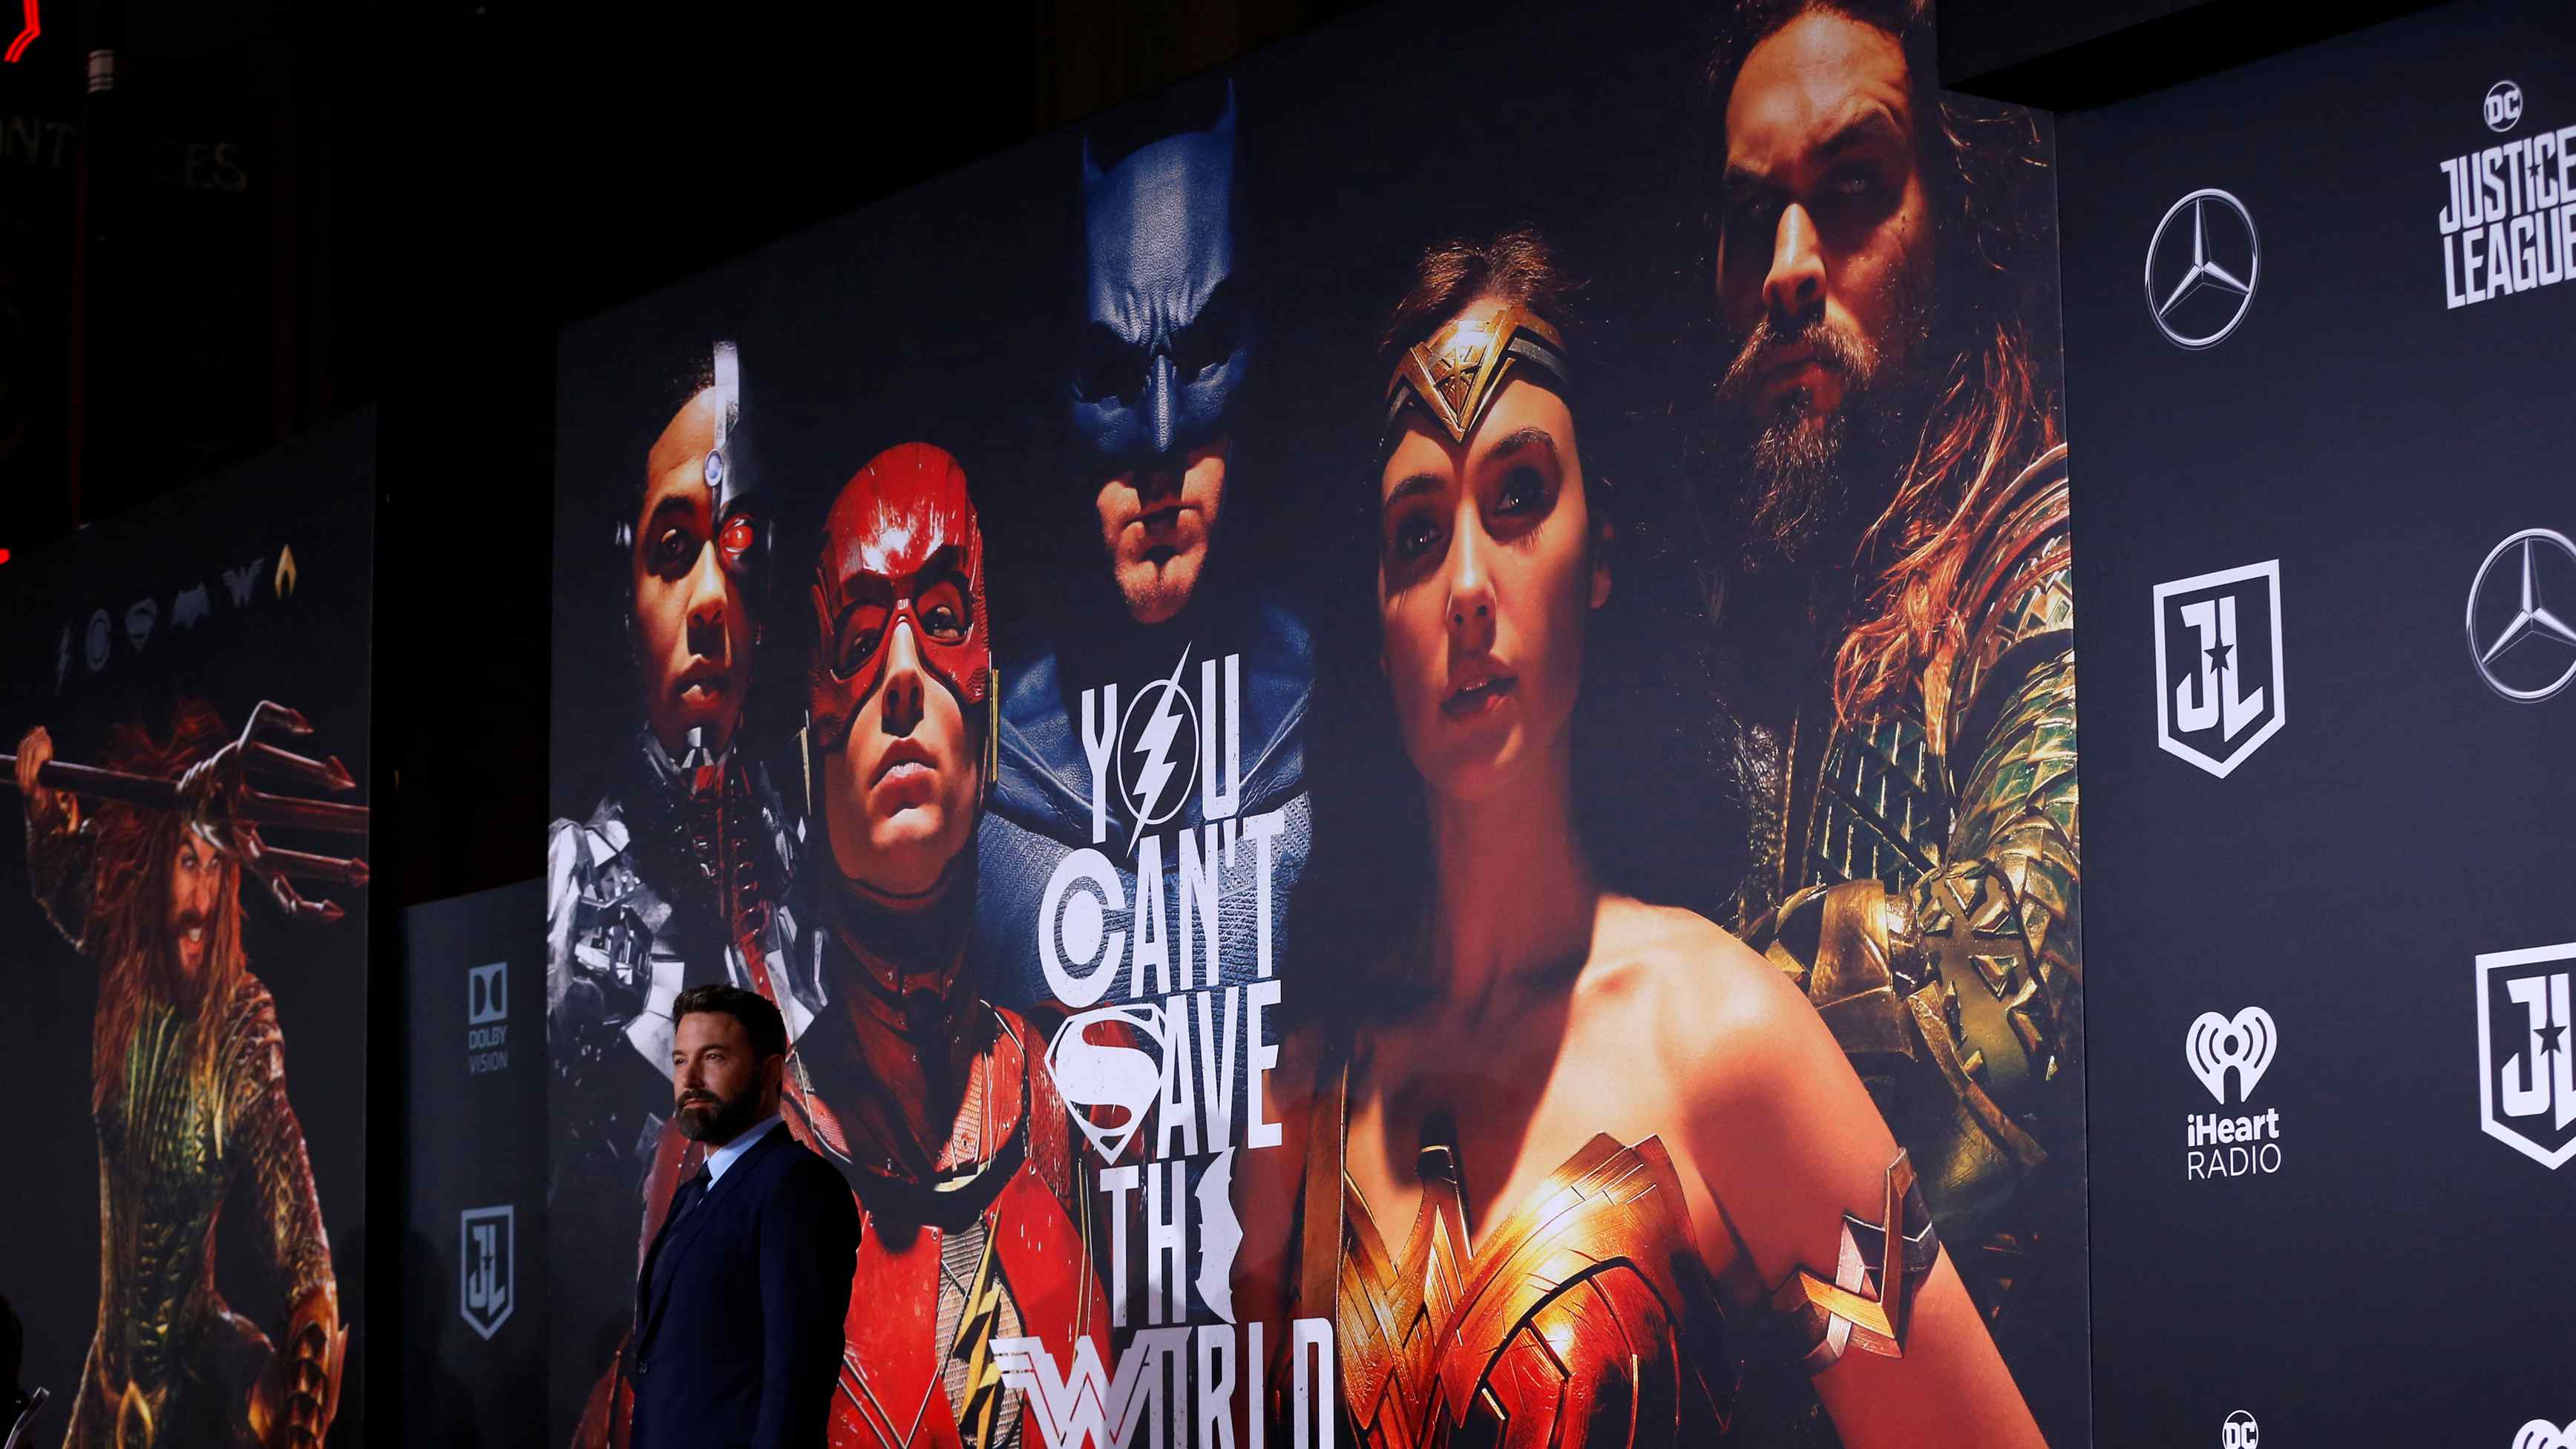 HBO Max grants fans' wishes to see unreleased cut of 'Justice League' - CGTN